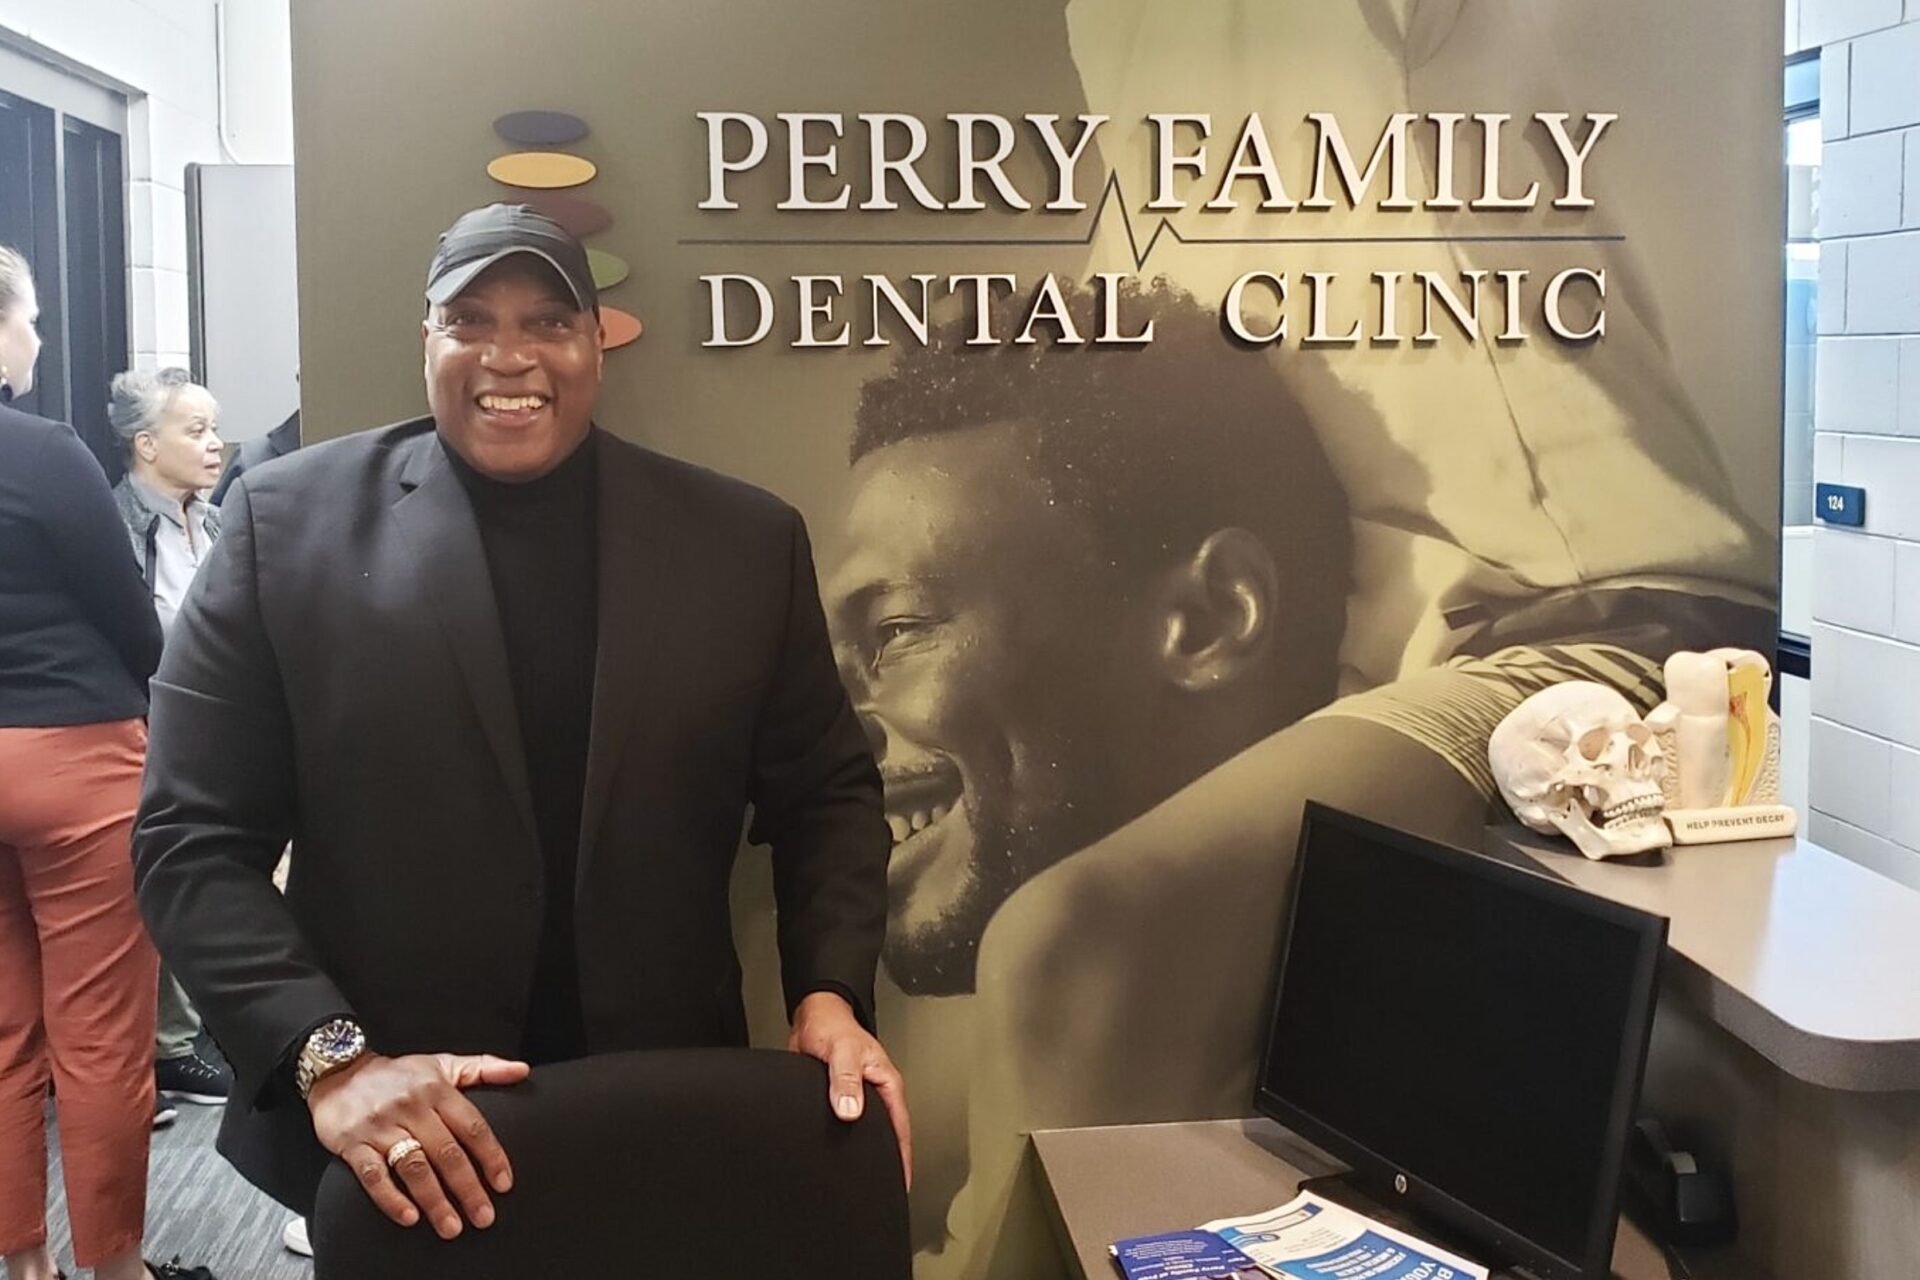 Aaron Perry, dental clinic, men, families